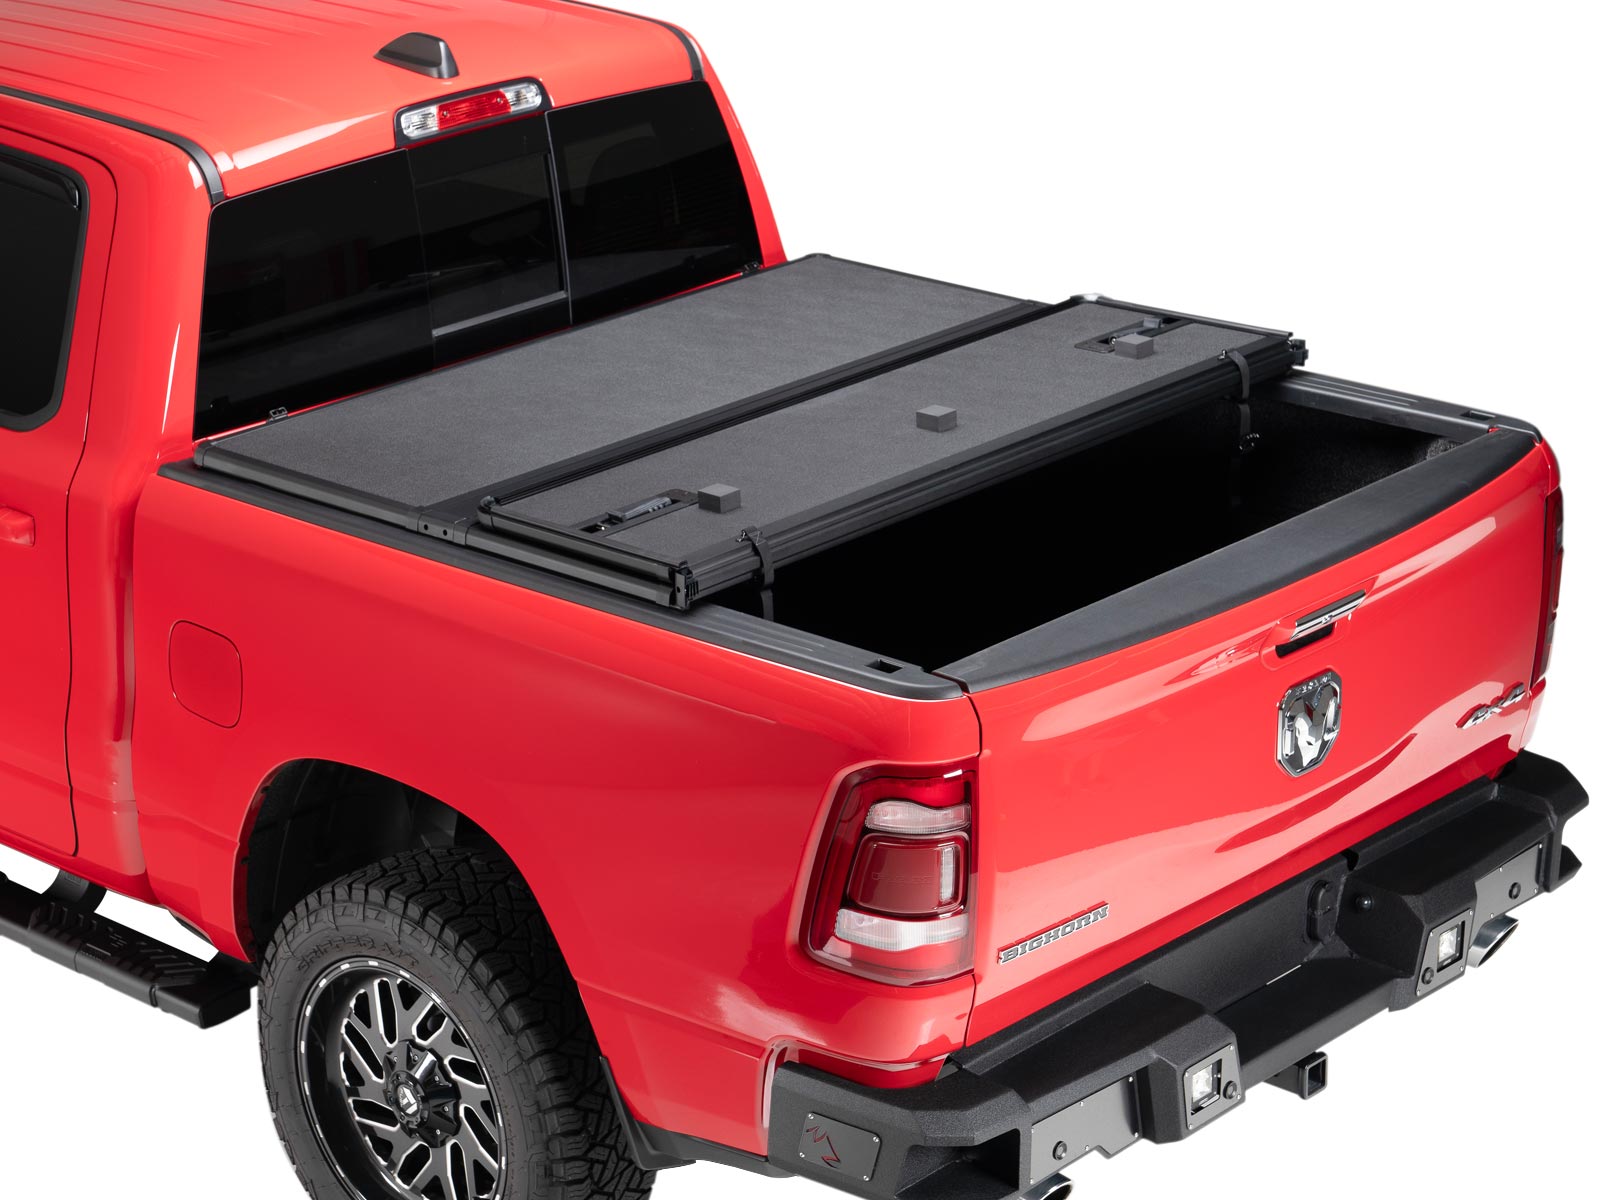 Made in the USA Fits 2015-2020 GM Colorado/Canyon 5 Bed Gator FX Hard Quad-Fold Truck Bed Tonneau Cover 8828126